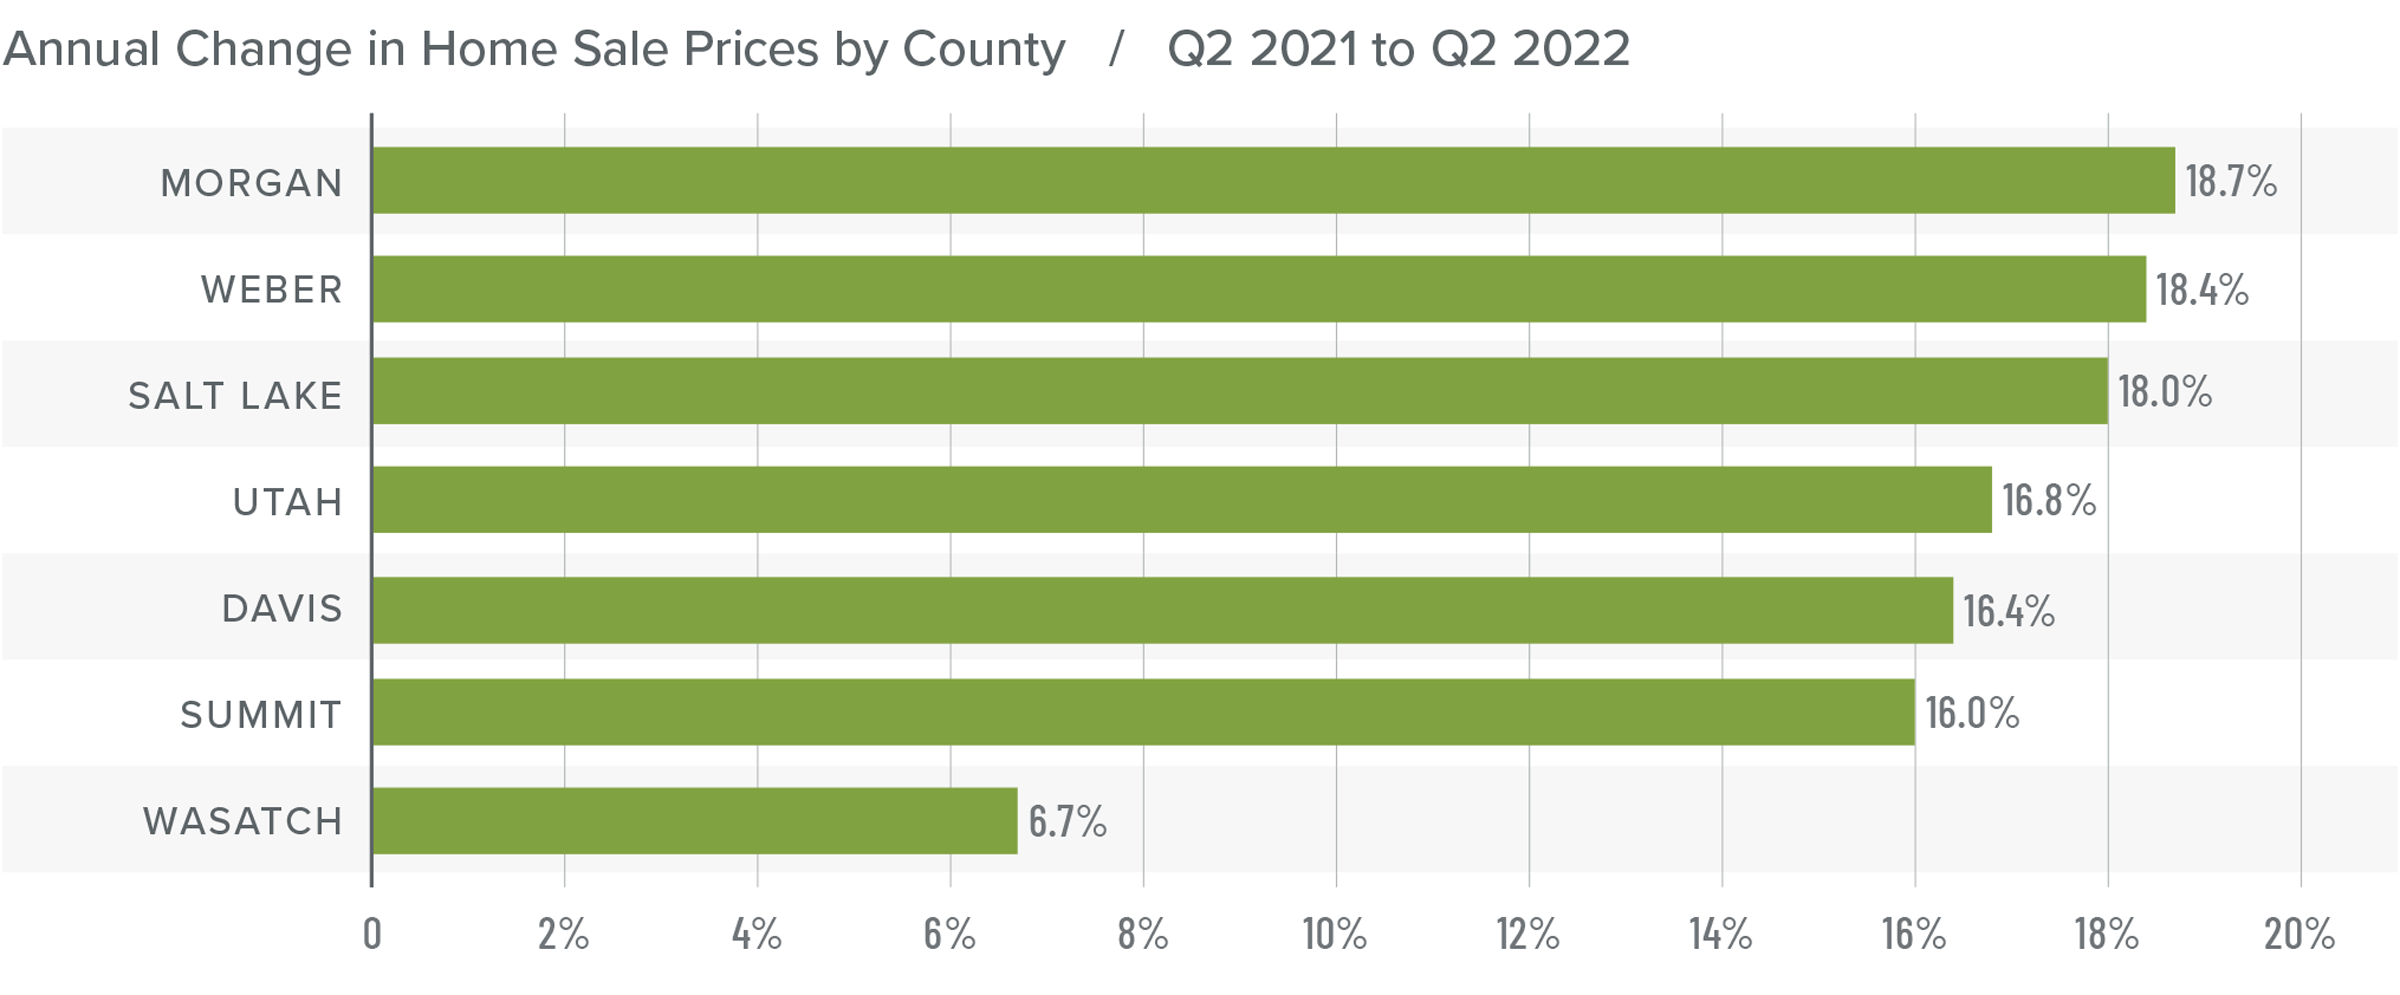 A bar graph showing the annual change in home sale prices for various counties in Utah from Q2 2021 to Q2 2022. Morgna County tops the list at 18.7%, followed by Weber at 18.4%, Salt Lake at 18%, Utah at 16.8%, Davis at 16.4%, Summit at 16%, and Wasatch at 6.7%.